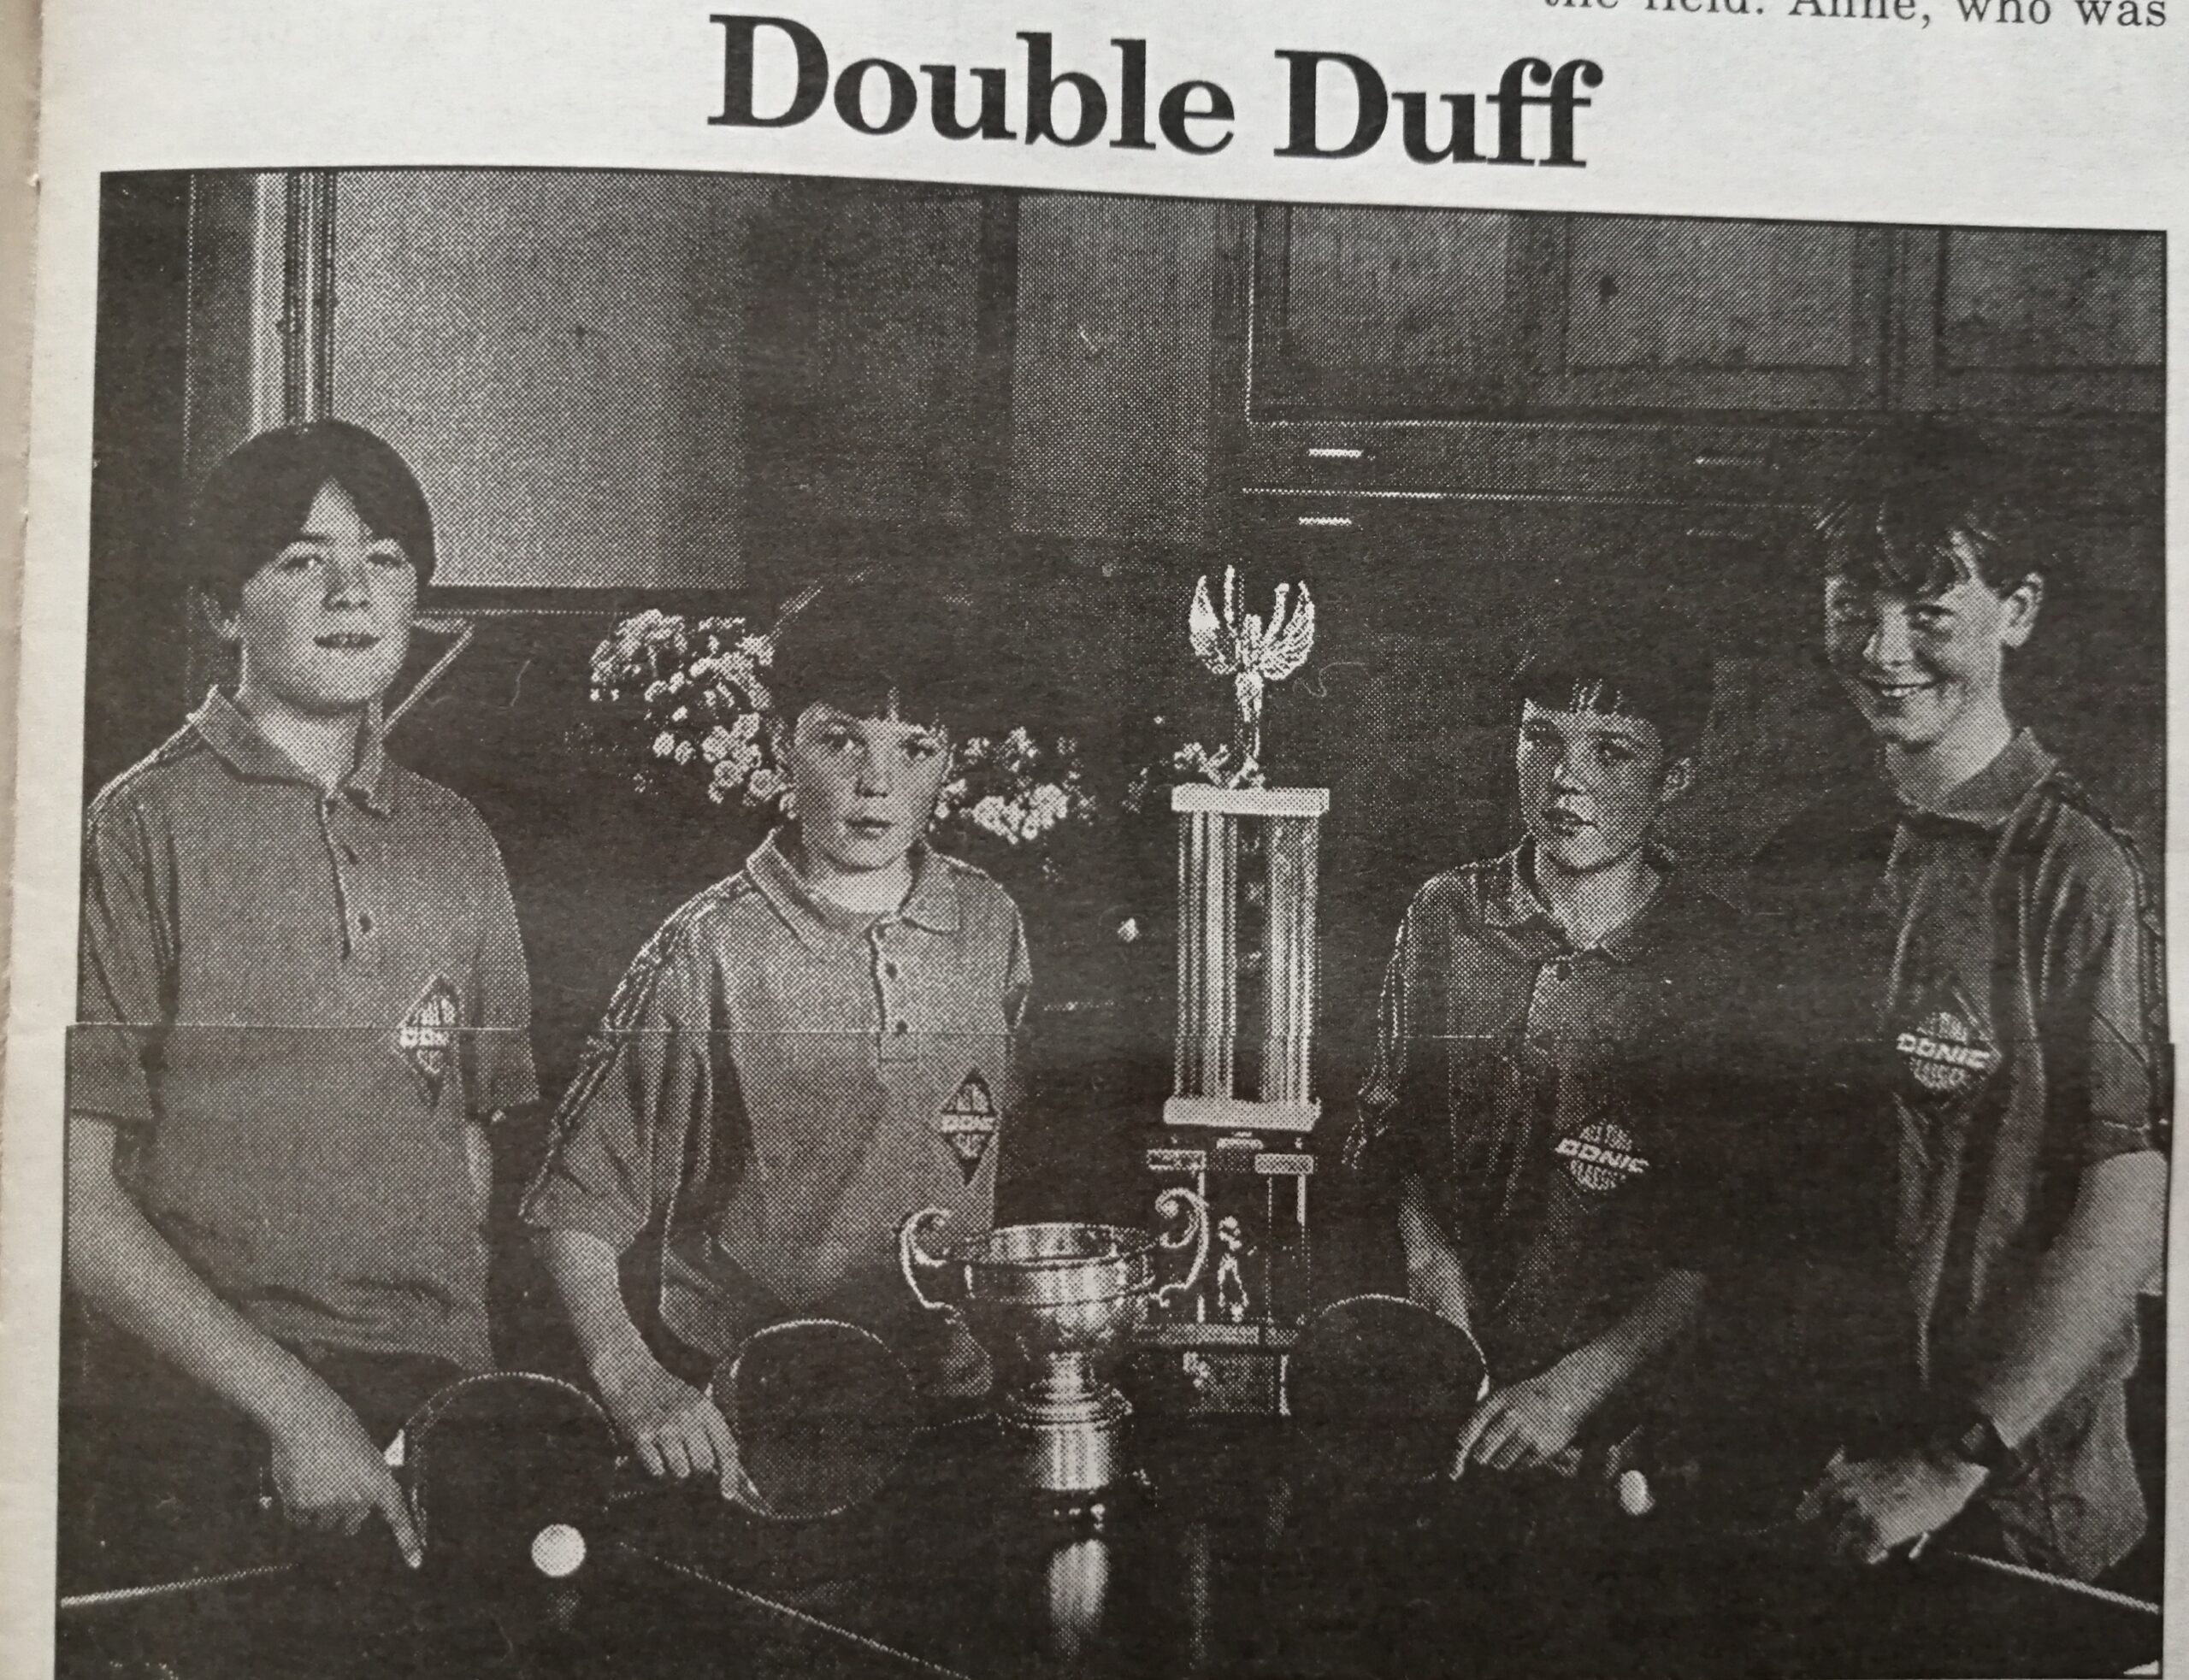 Ciaran Doyle, Graham Duff, Eric Duff and Conor McNamara with their many table tennis trophies